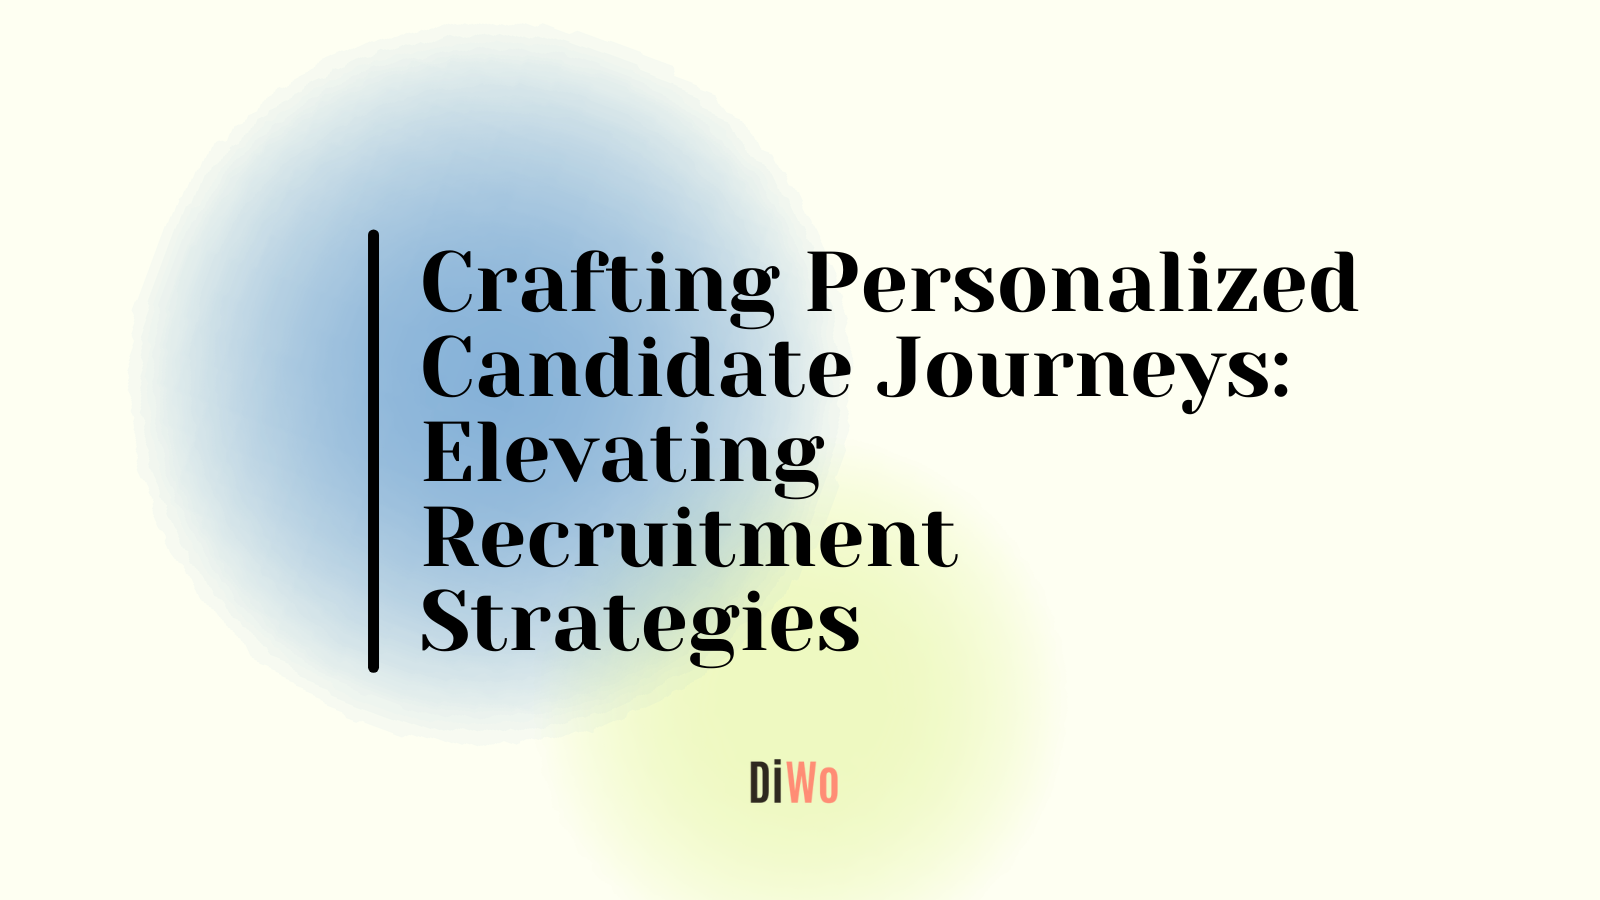 Featured image for “Crafting Personalized Candidate Journeys: Elevating Recruitment Strategies”